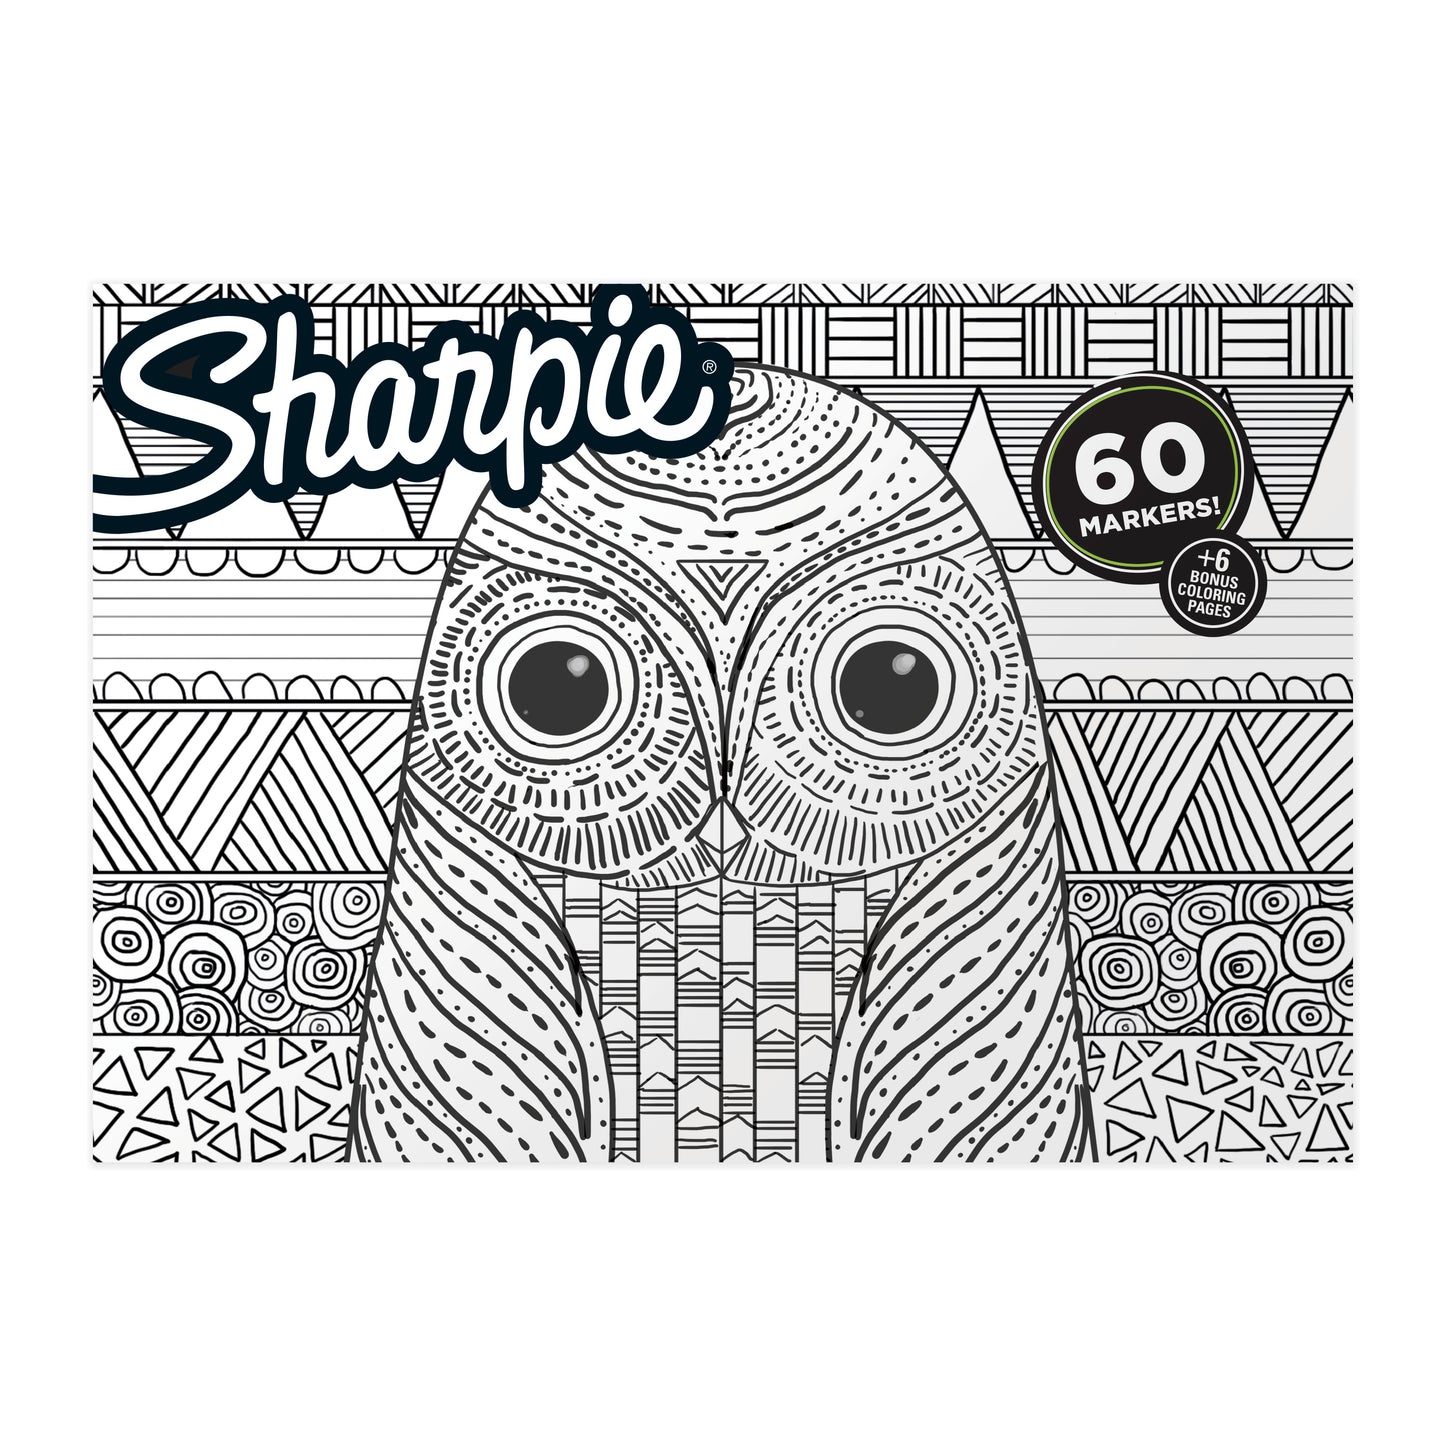 Sharpie Limited Edition Eulenbox, 60 CT